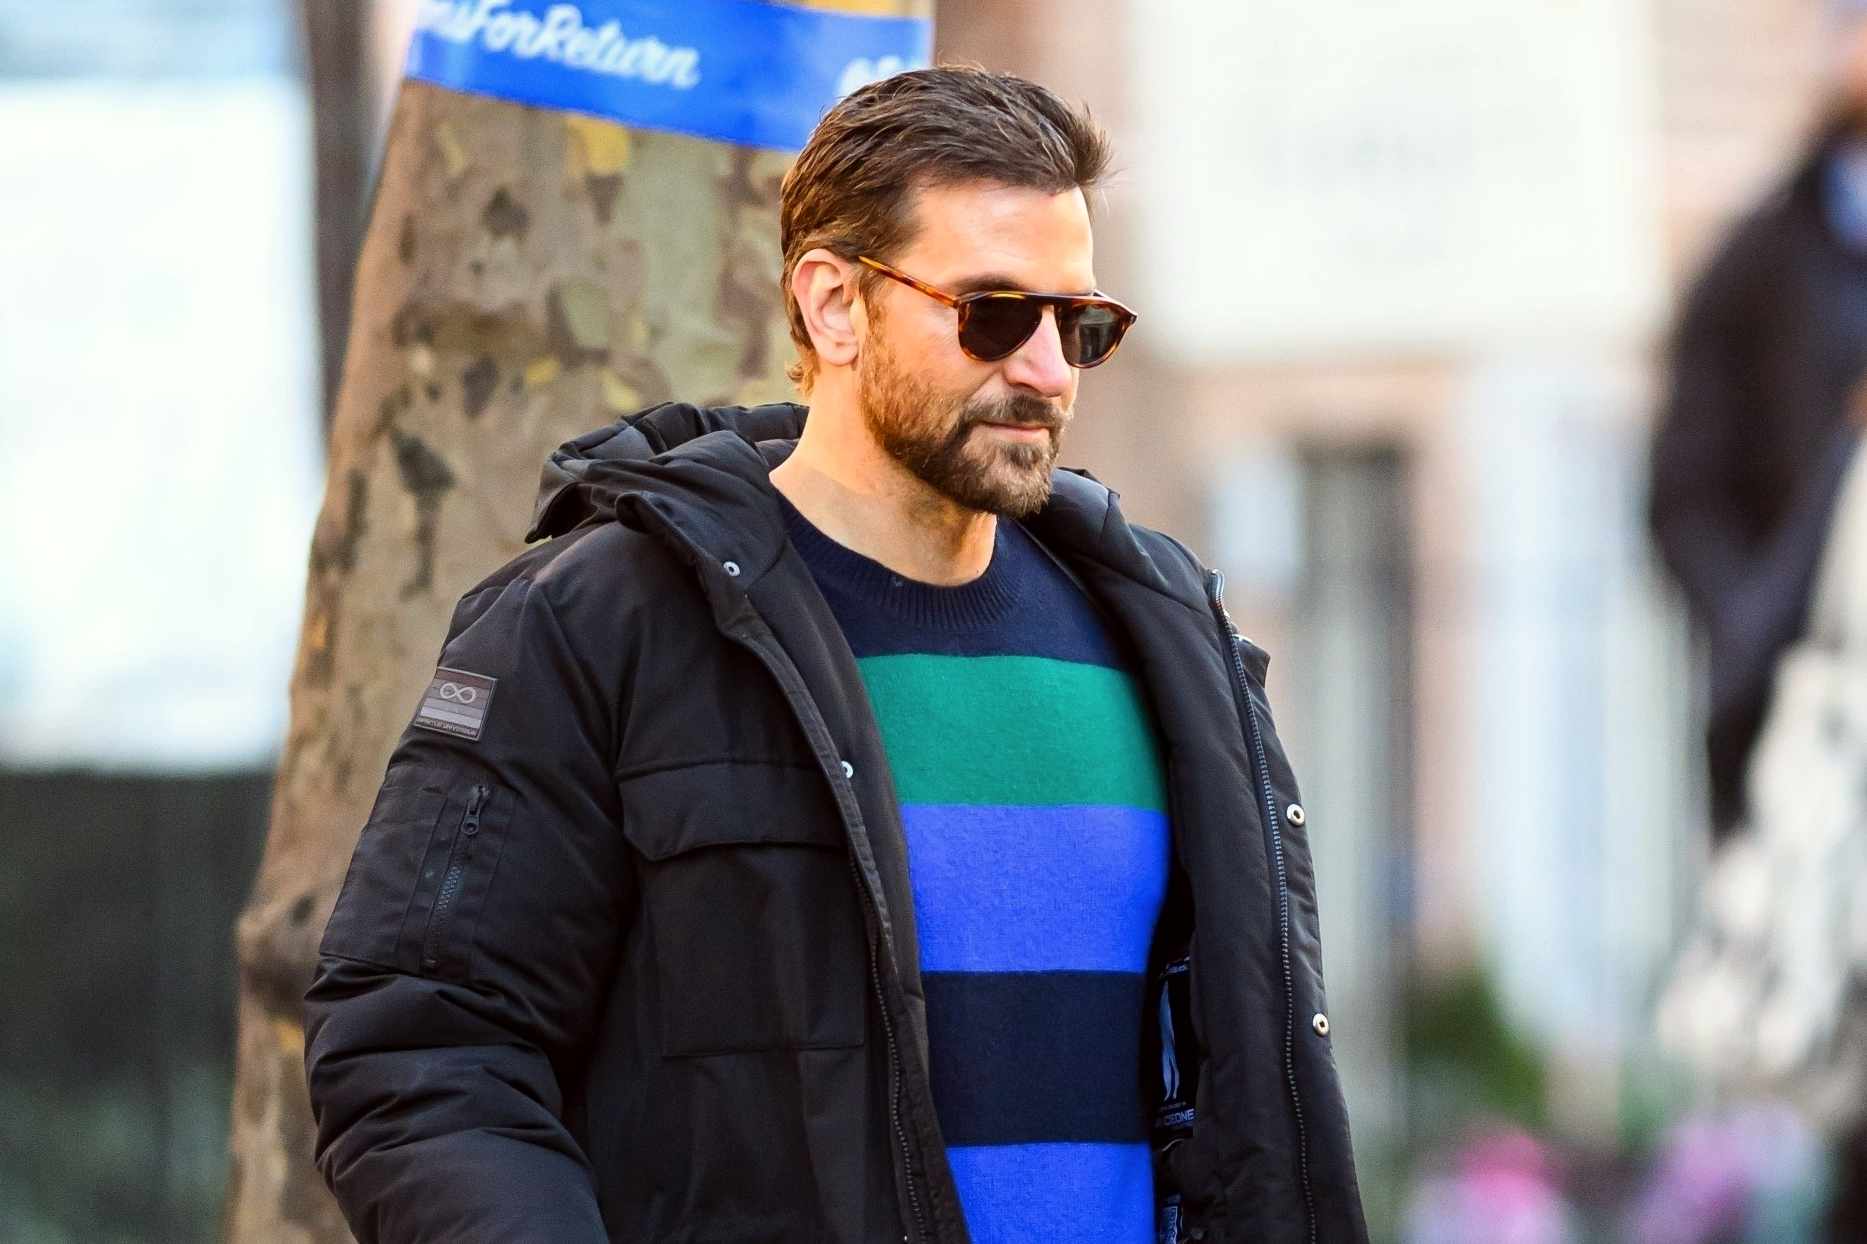 Bradley Cooper wears a Spaceone coat and striped sweater from Gigi Hadid's brand with Salomon sneaker boots